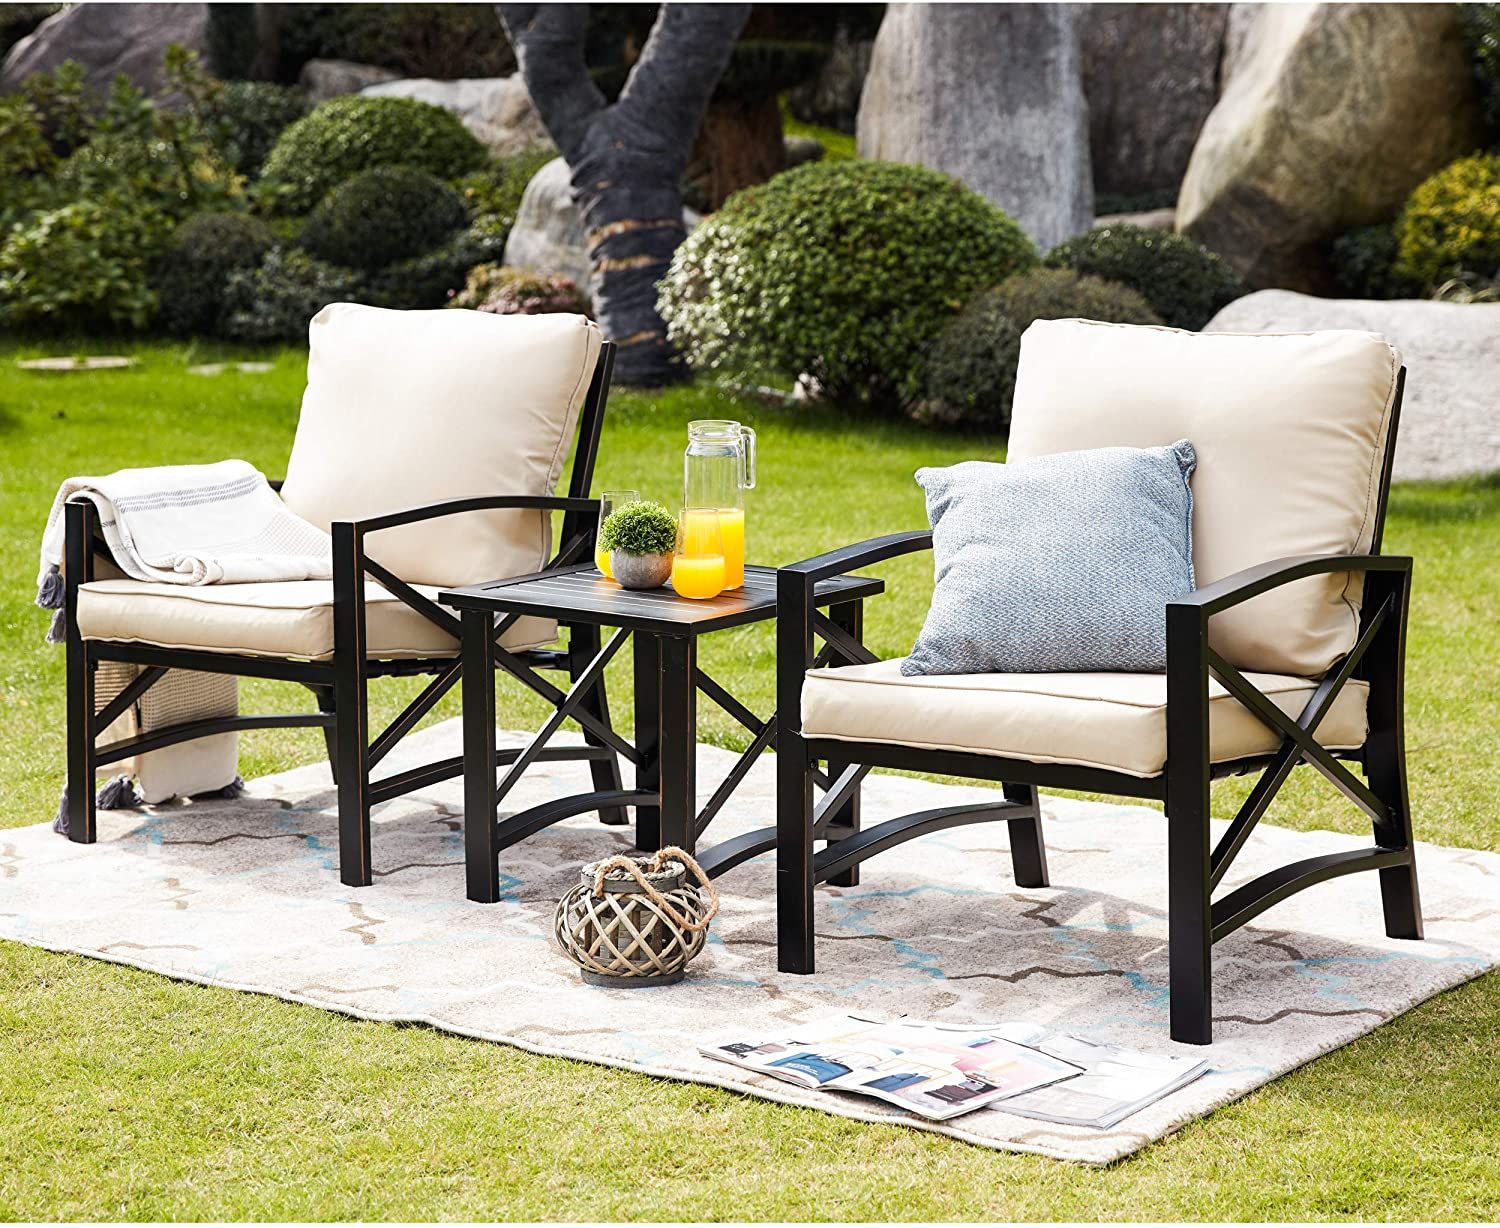 8 Best Patio Furniture Sets 2021 The, Cool Outdoor Furniture Sets